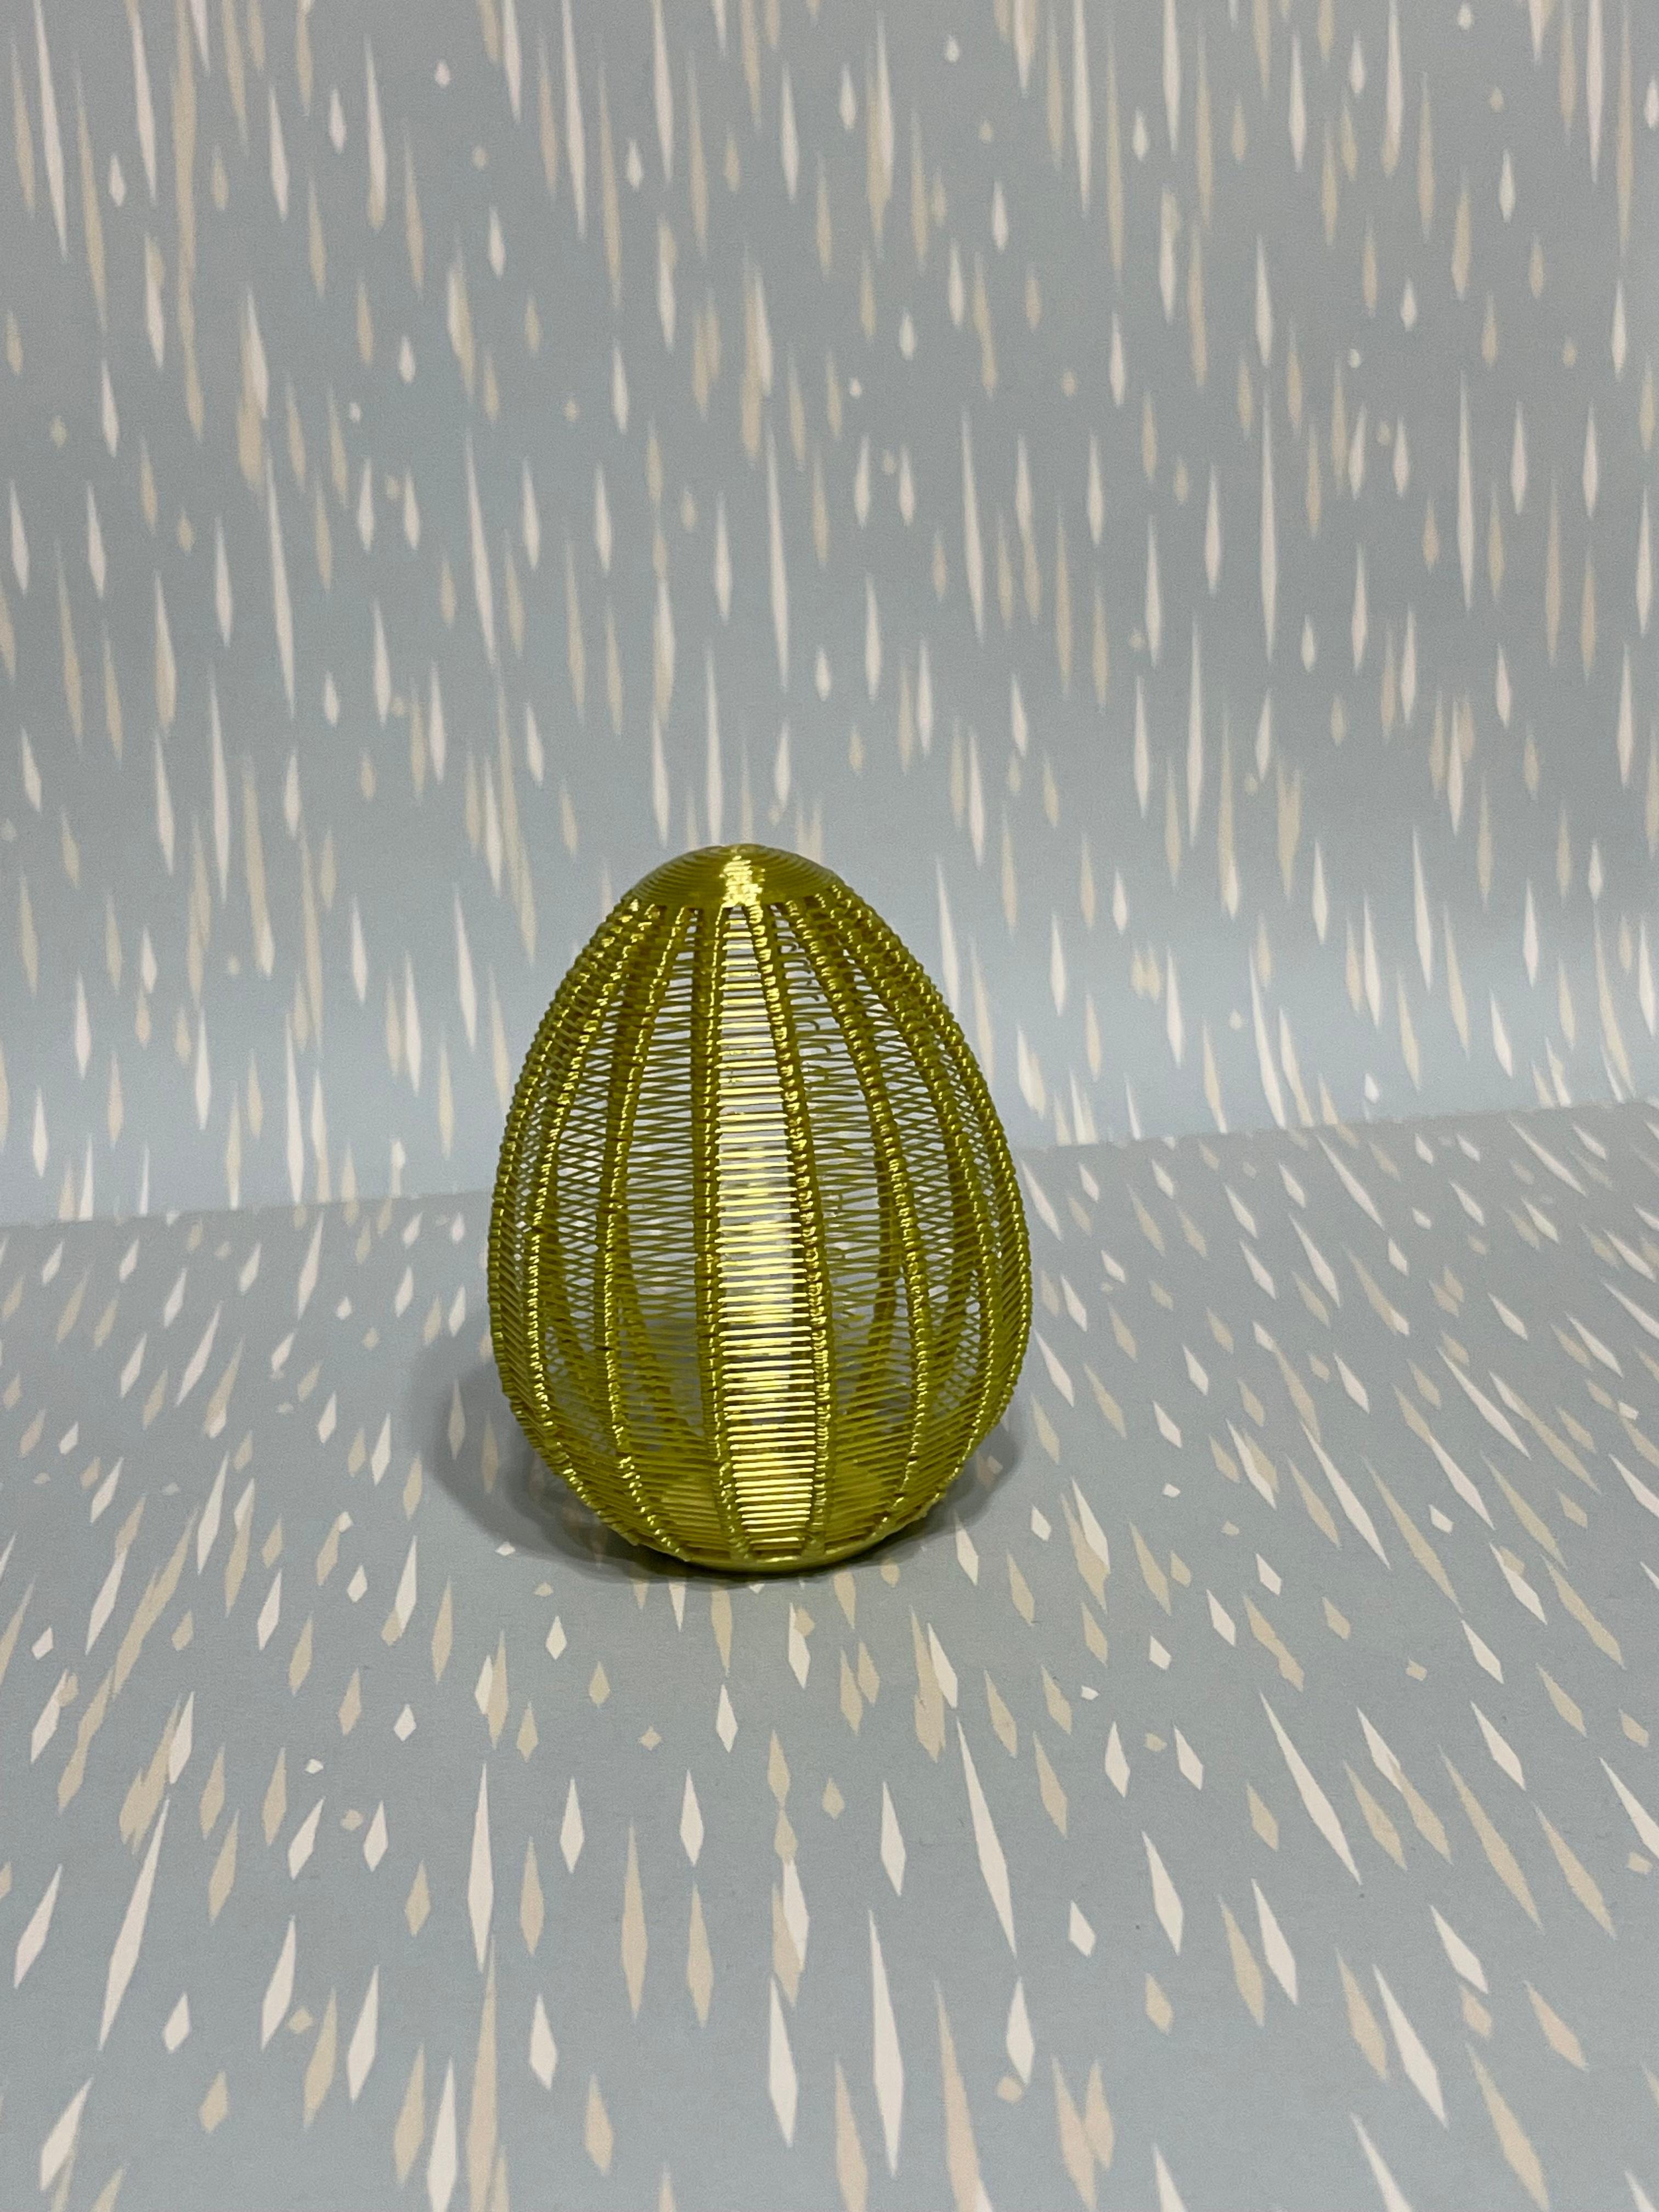 String Egg Ornament - This was the first time I printed "string" - and although you can't see it very well - I had some extrusion issues.
Love the designs - and can't wait to print more! - 3d model